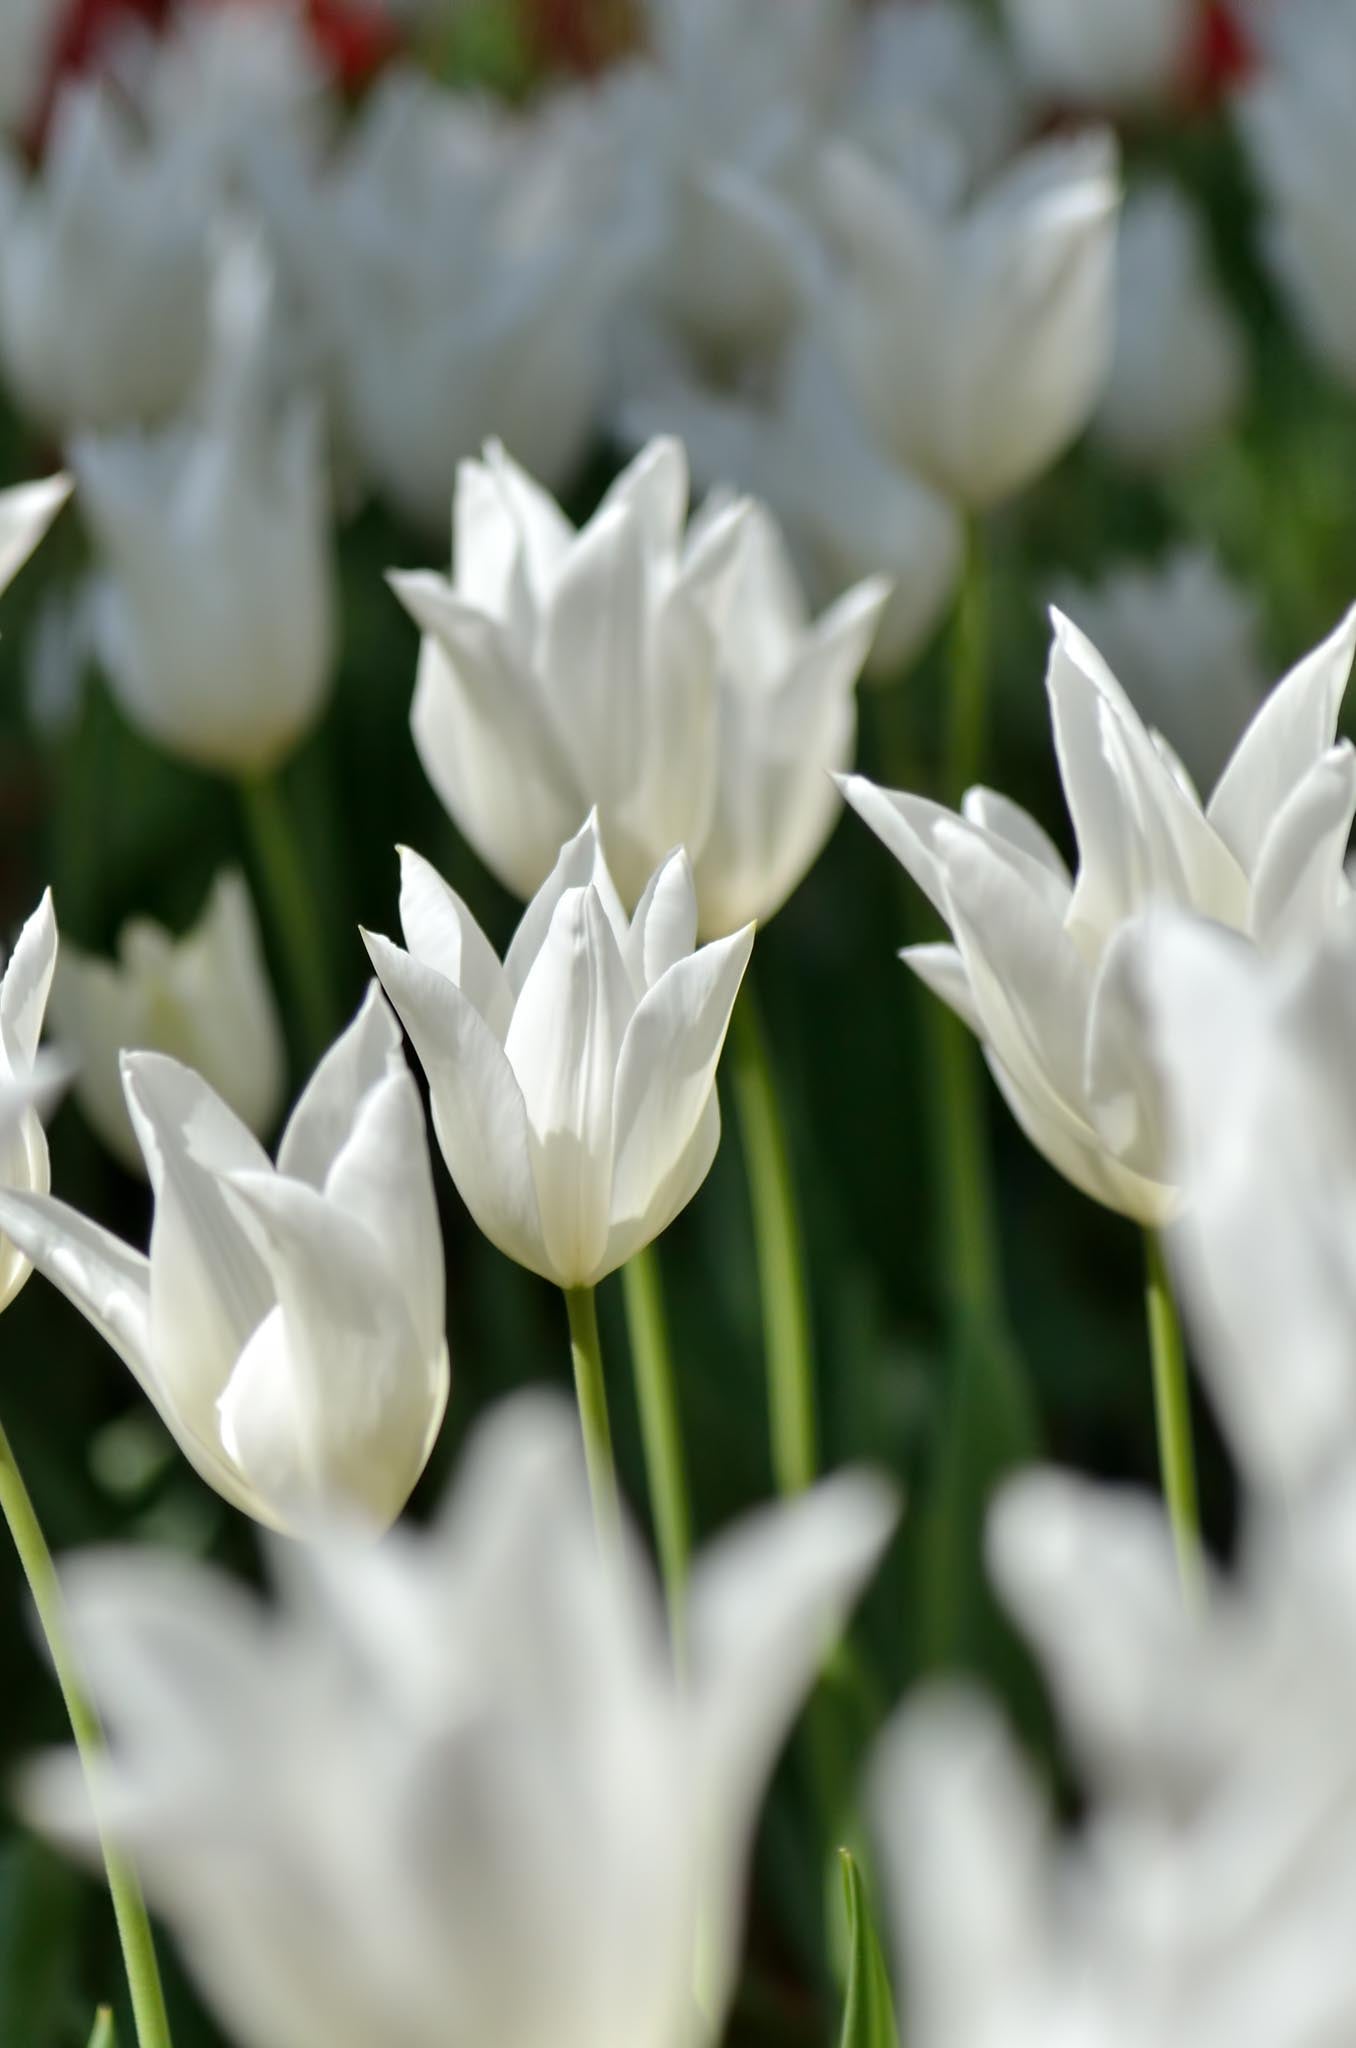 How to Grow and Care for Tulips